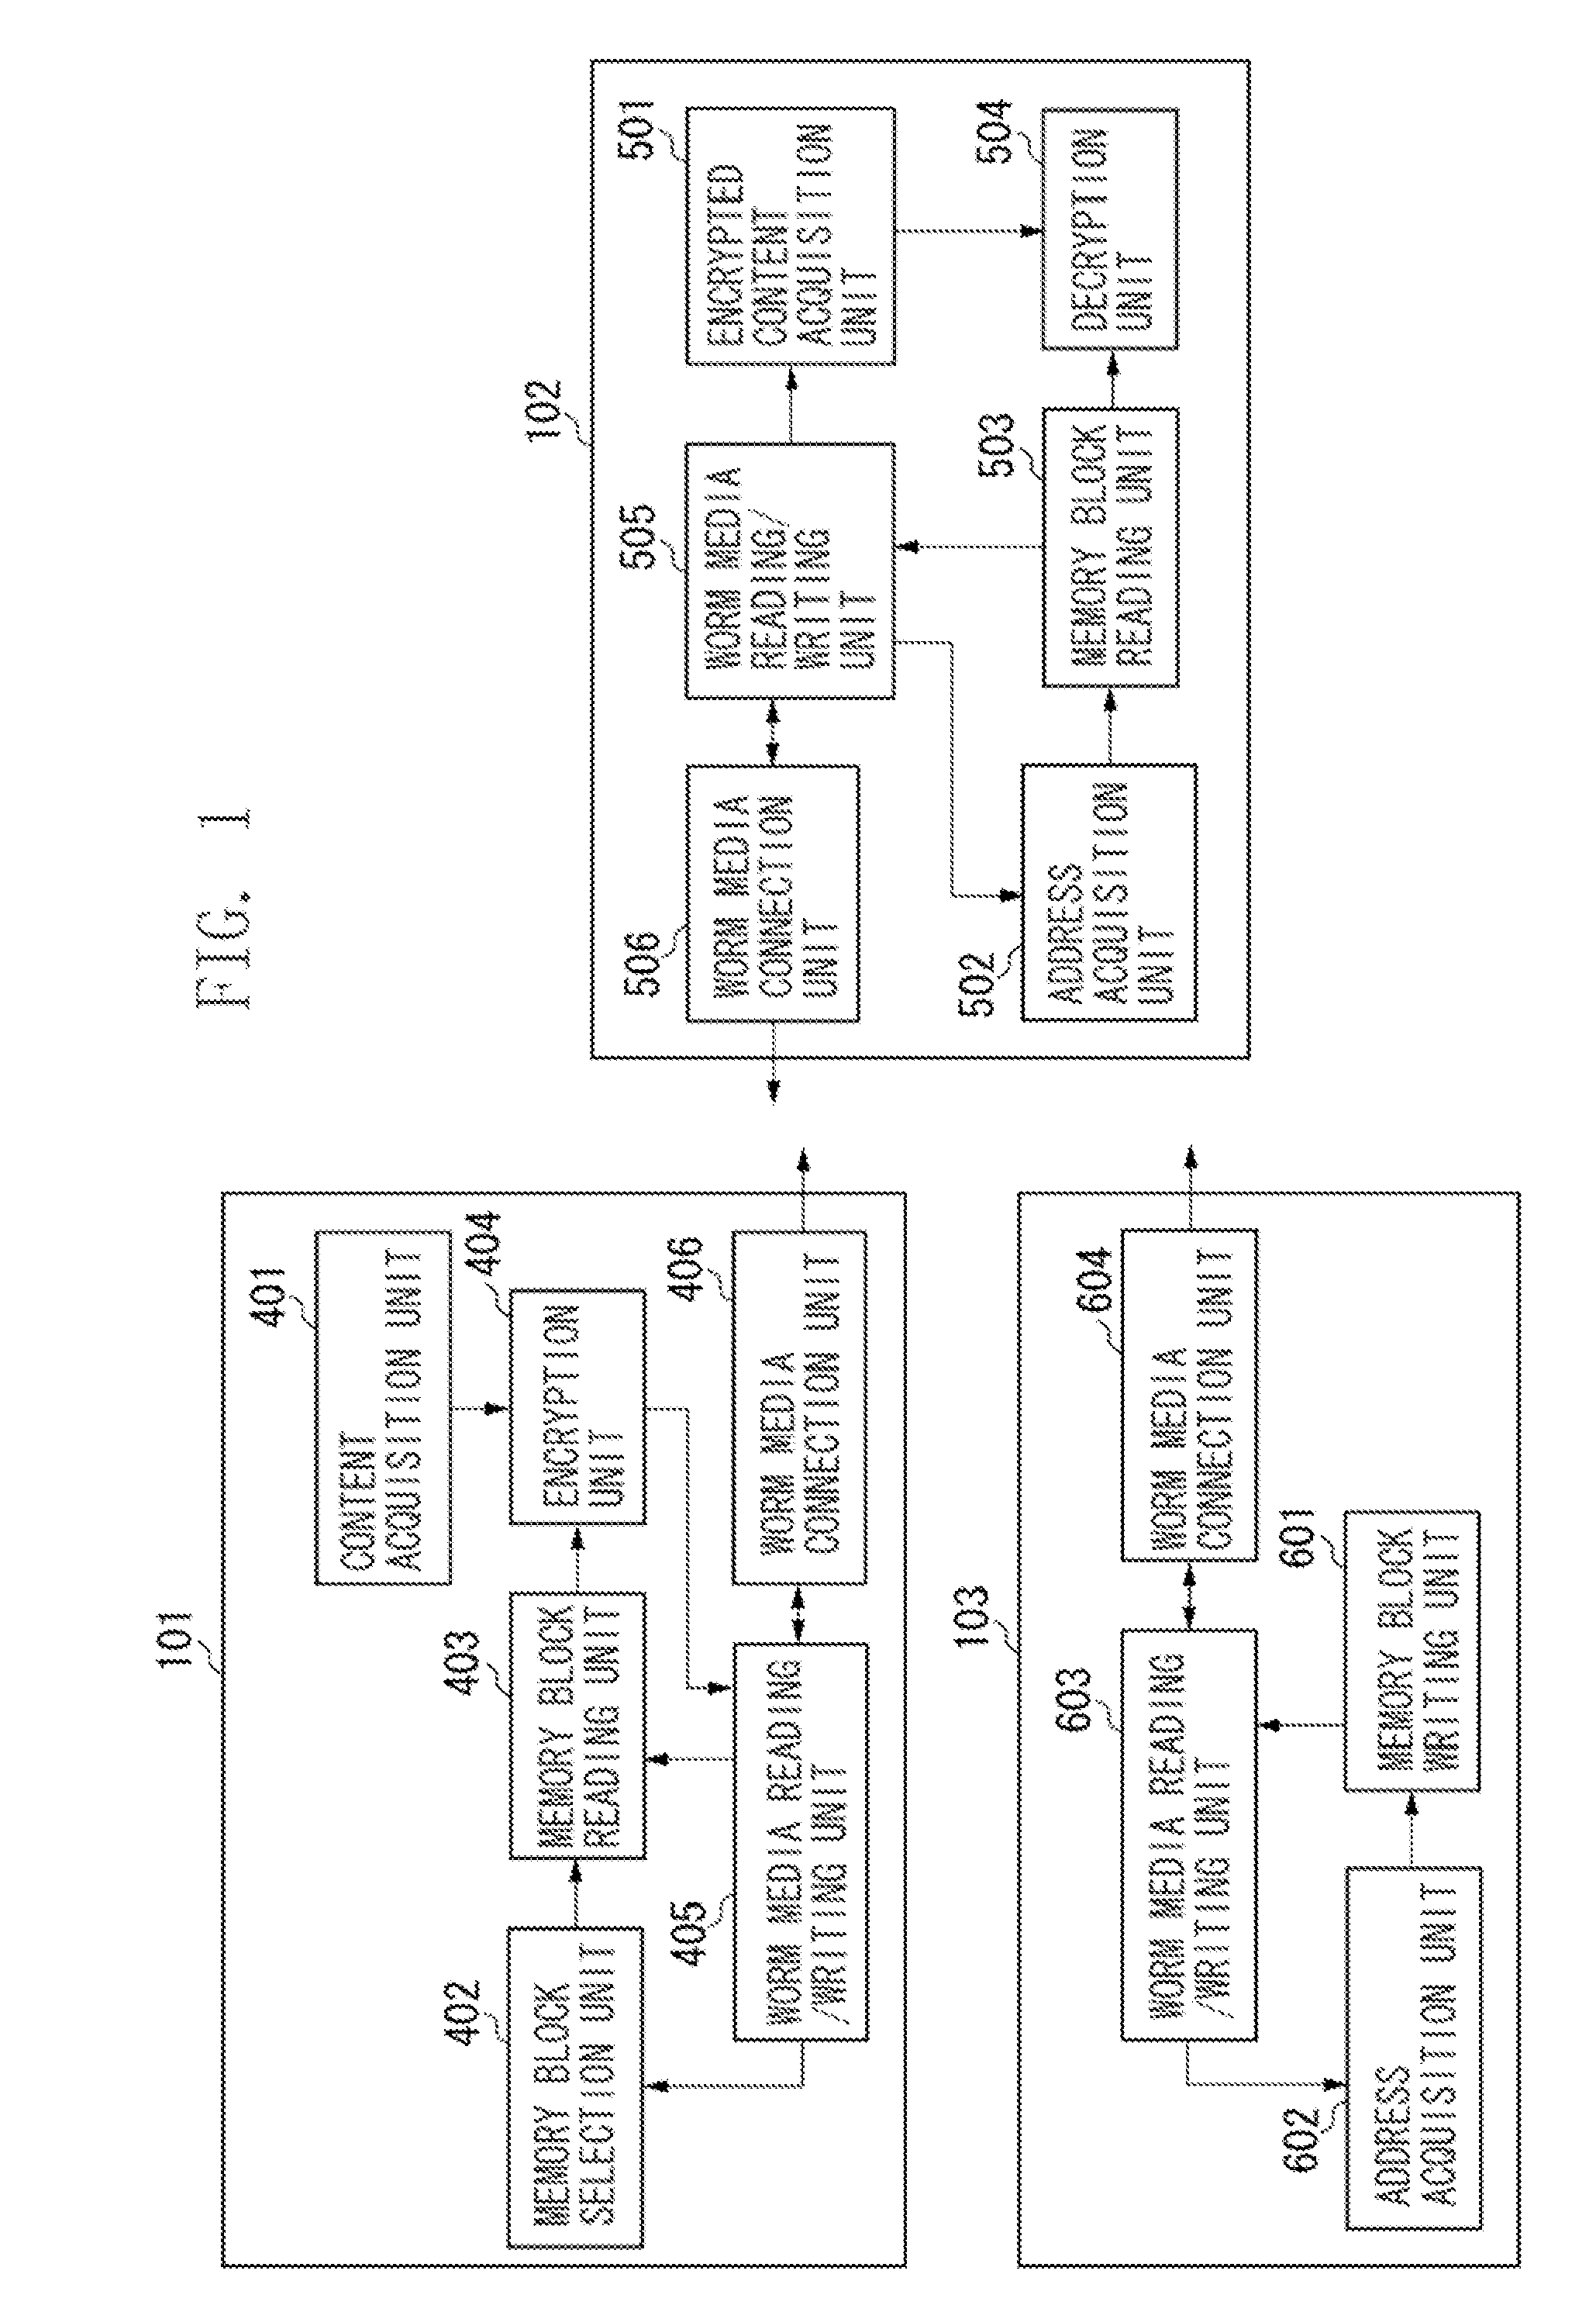 Data processing apparatus, data processing system, and method for controlling the same